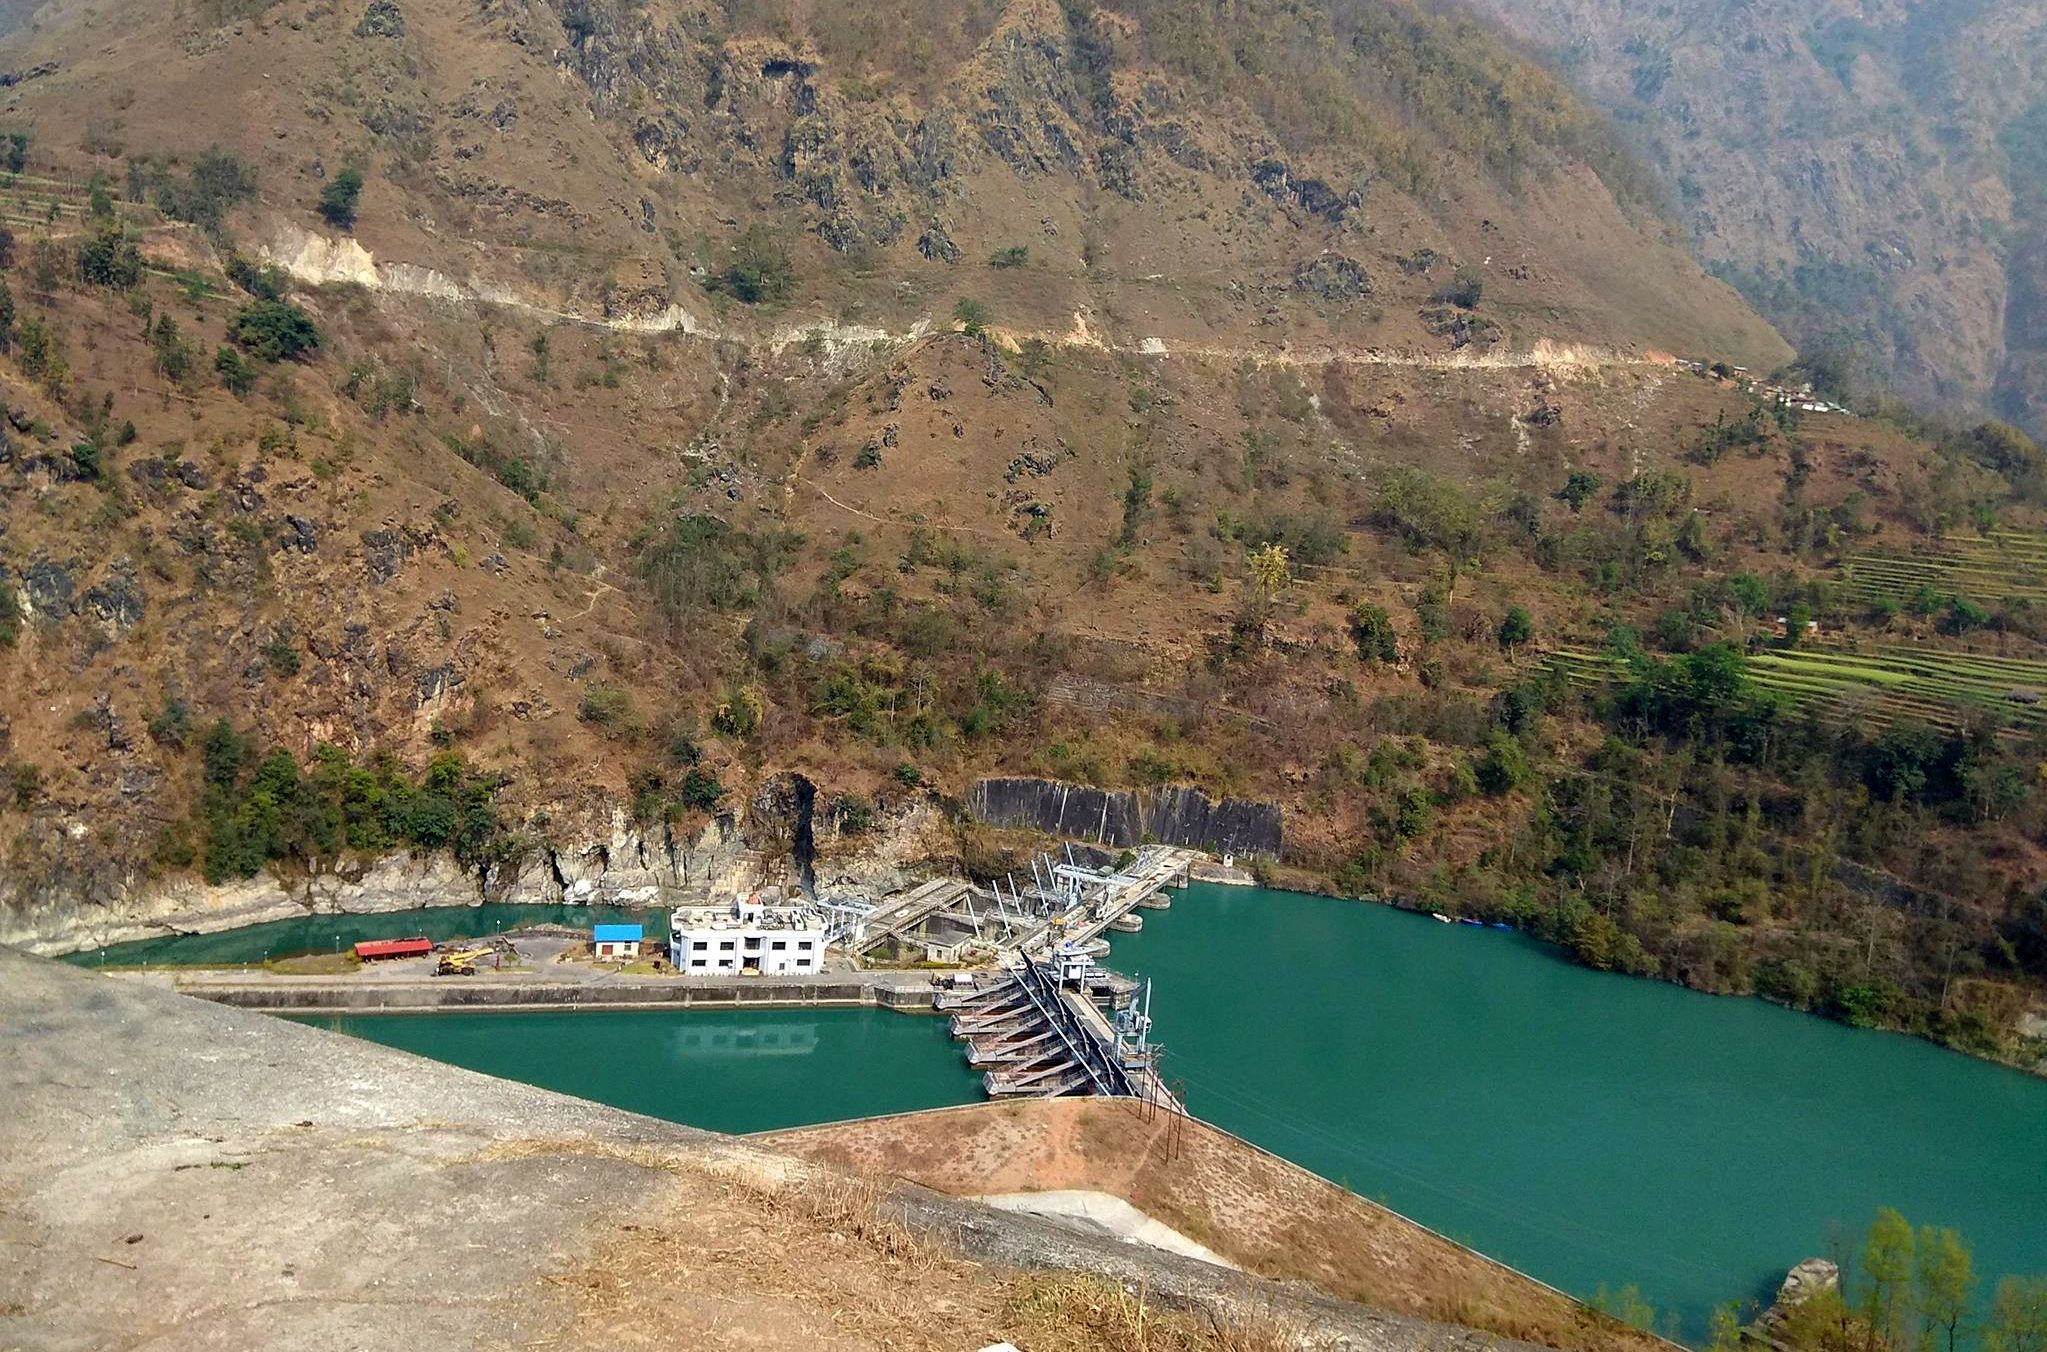 Hydro electric power station on Marsayangdi River